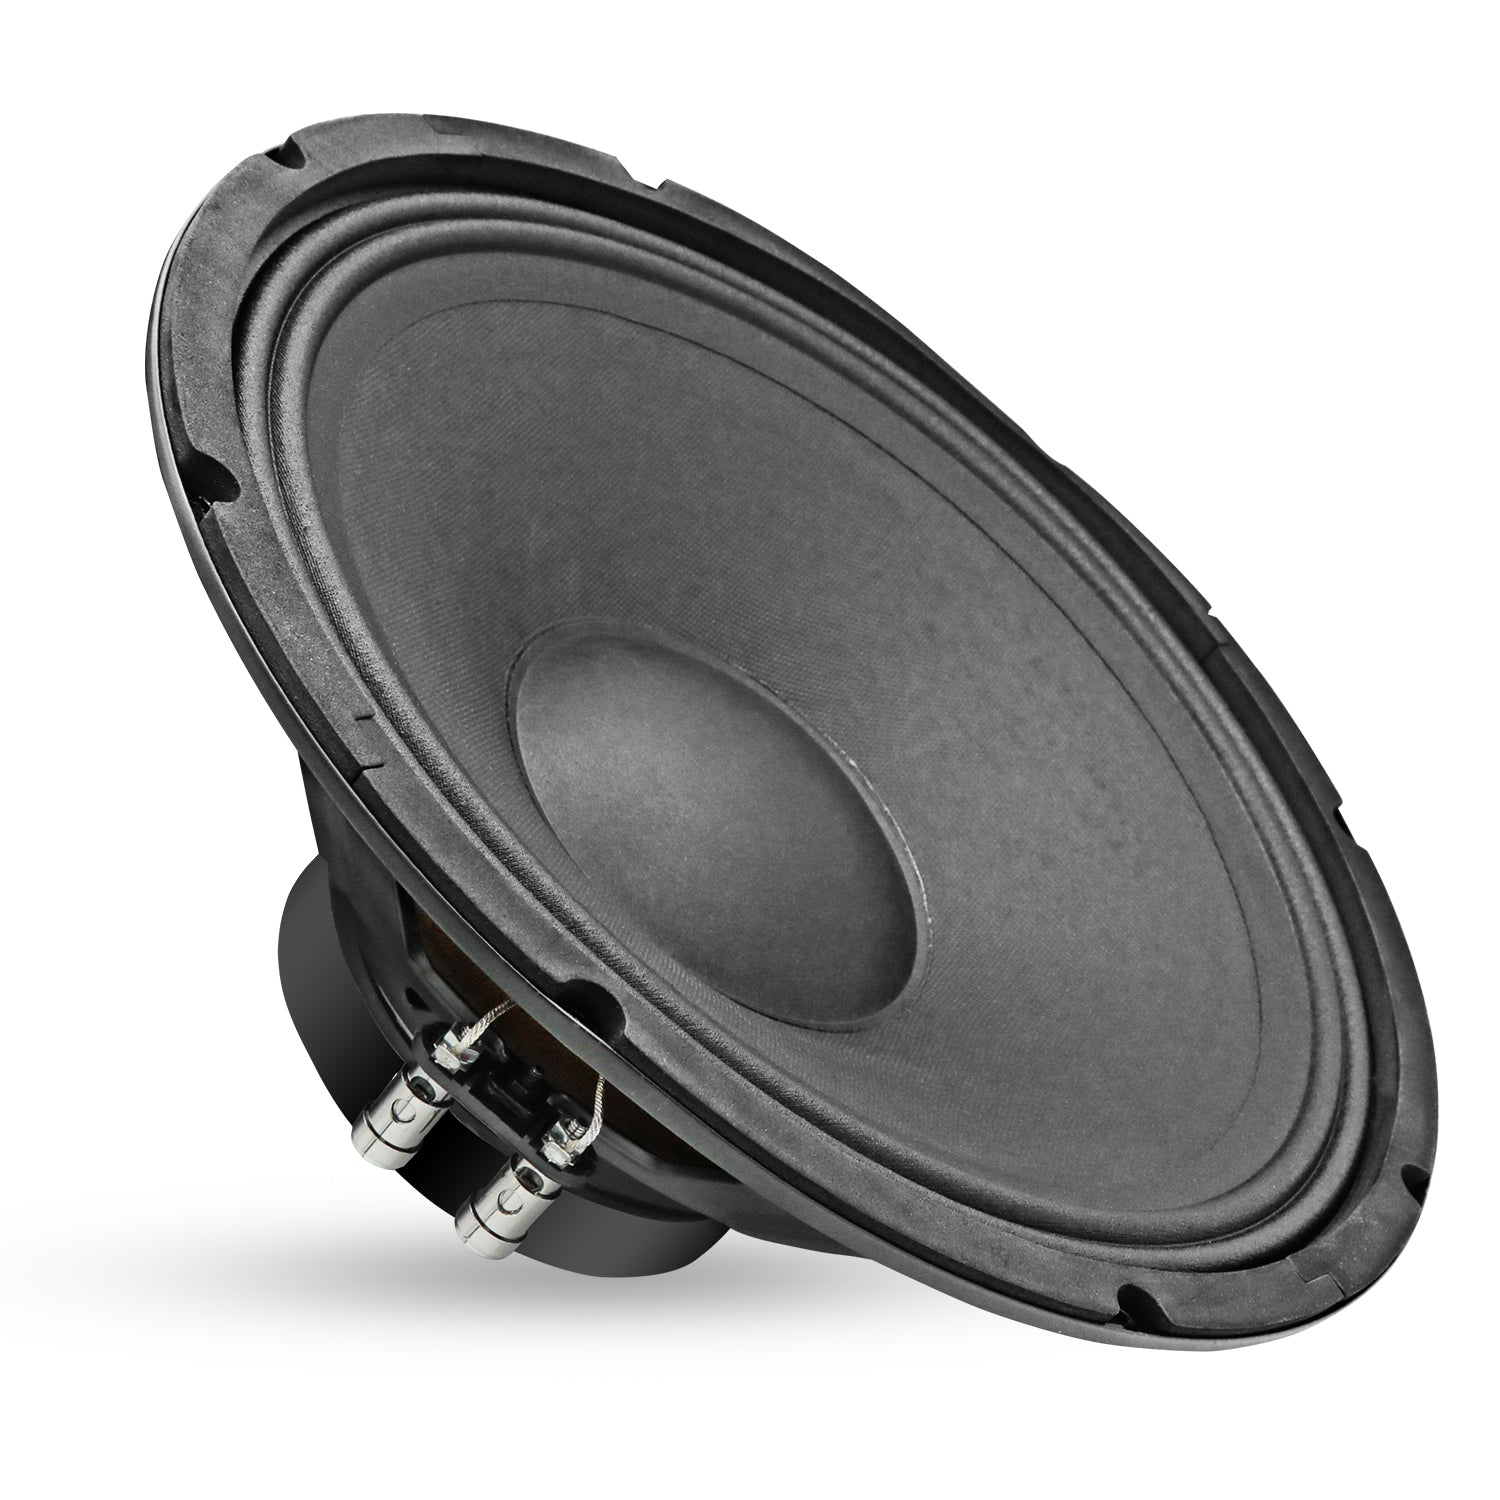 5 Core Speaker Subwoofer 12 Inch PA DJ Subs 200W Max Pro Audio 8Ohm Replacement Subwoofers